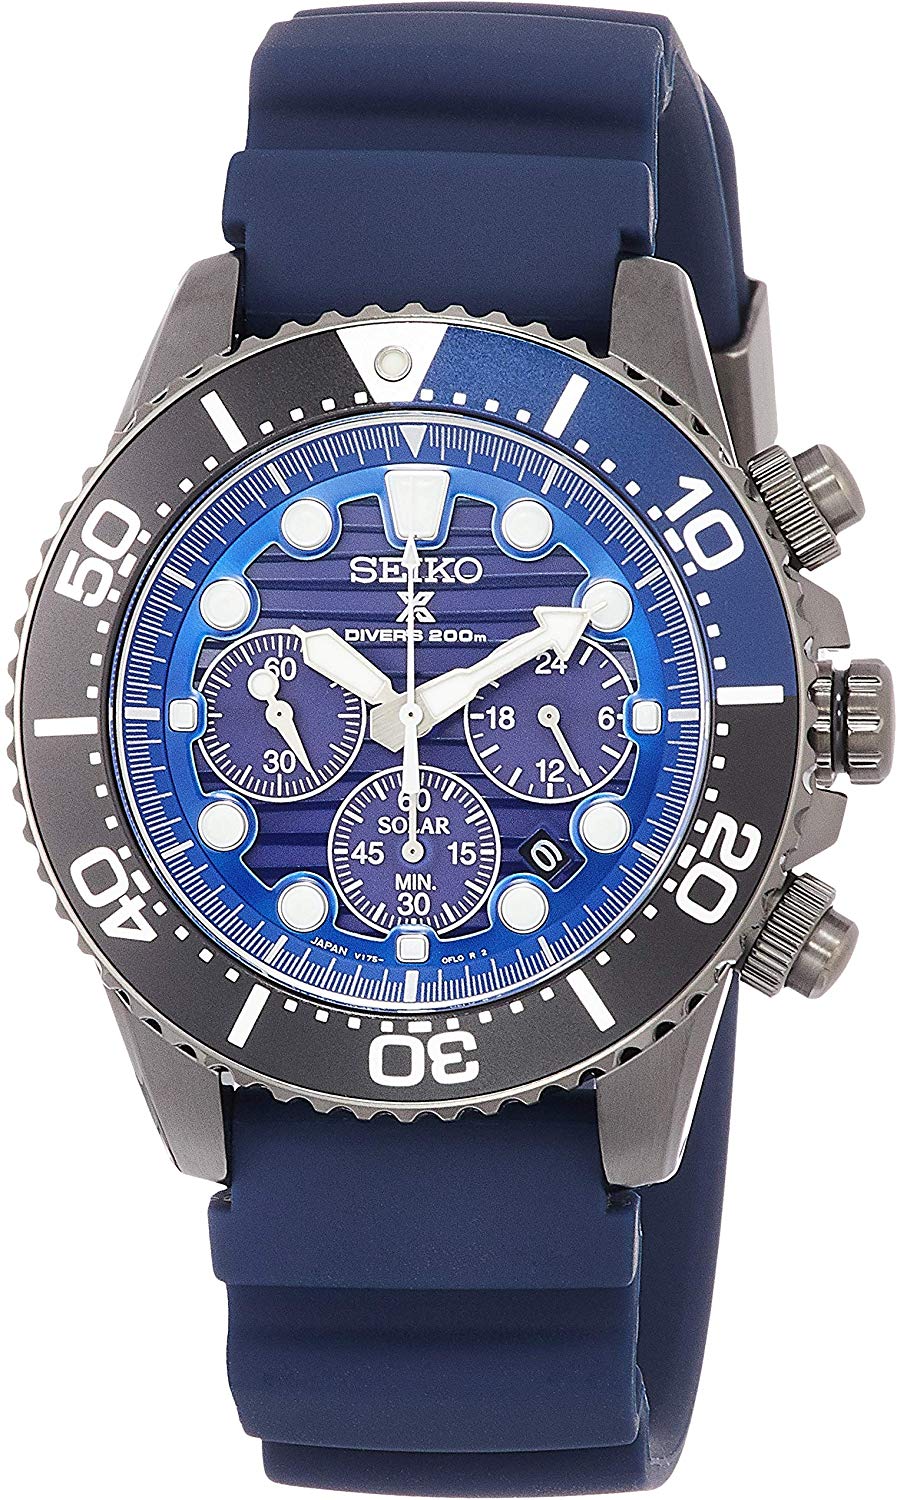 SEIKO PROSPEX Solar Save the Ocean Special Edition Limited Blue Dial  Chronograph Hard Rex Silicon Band SBDL057Men's Blue - Discovery Japan Mall